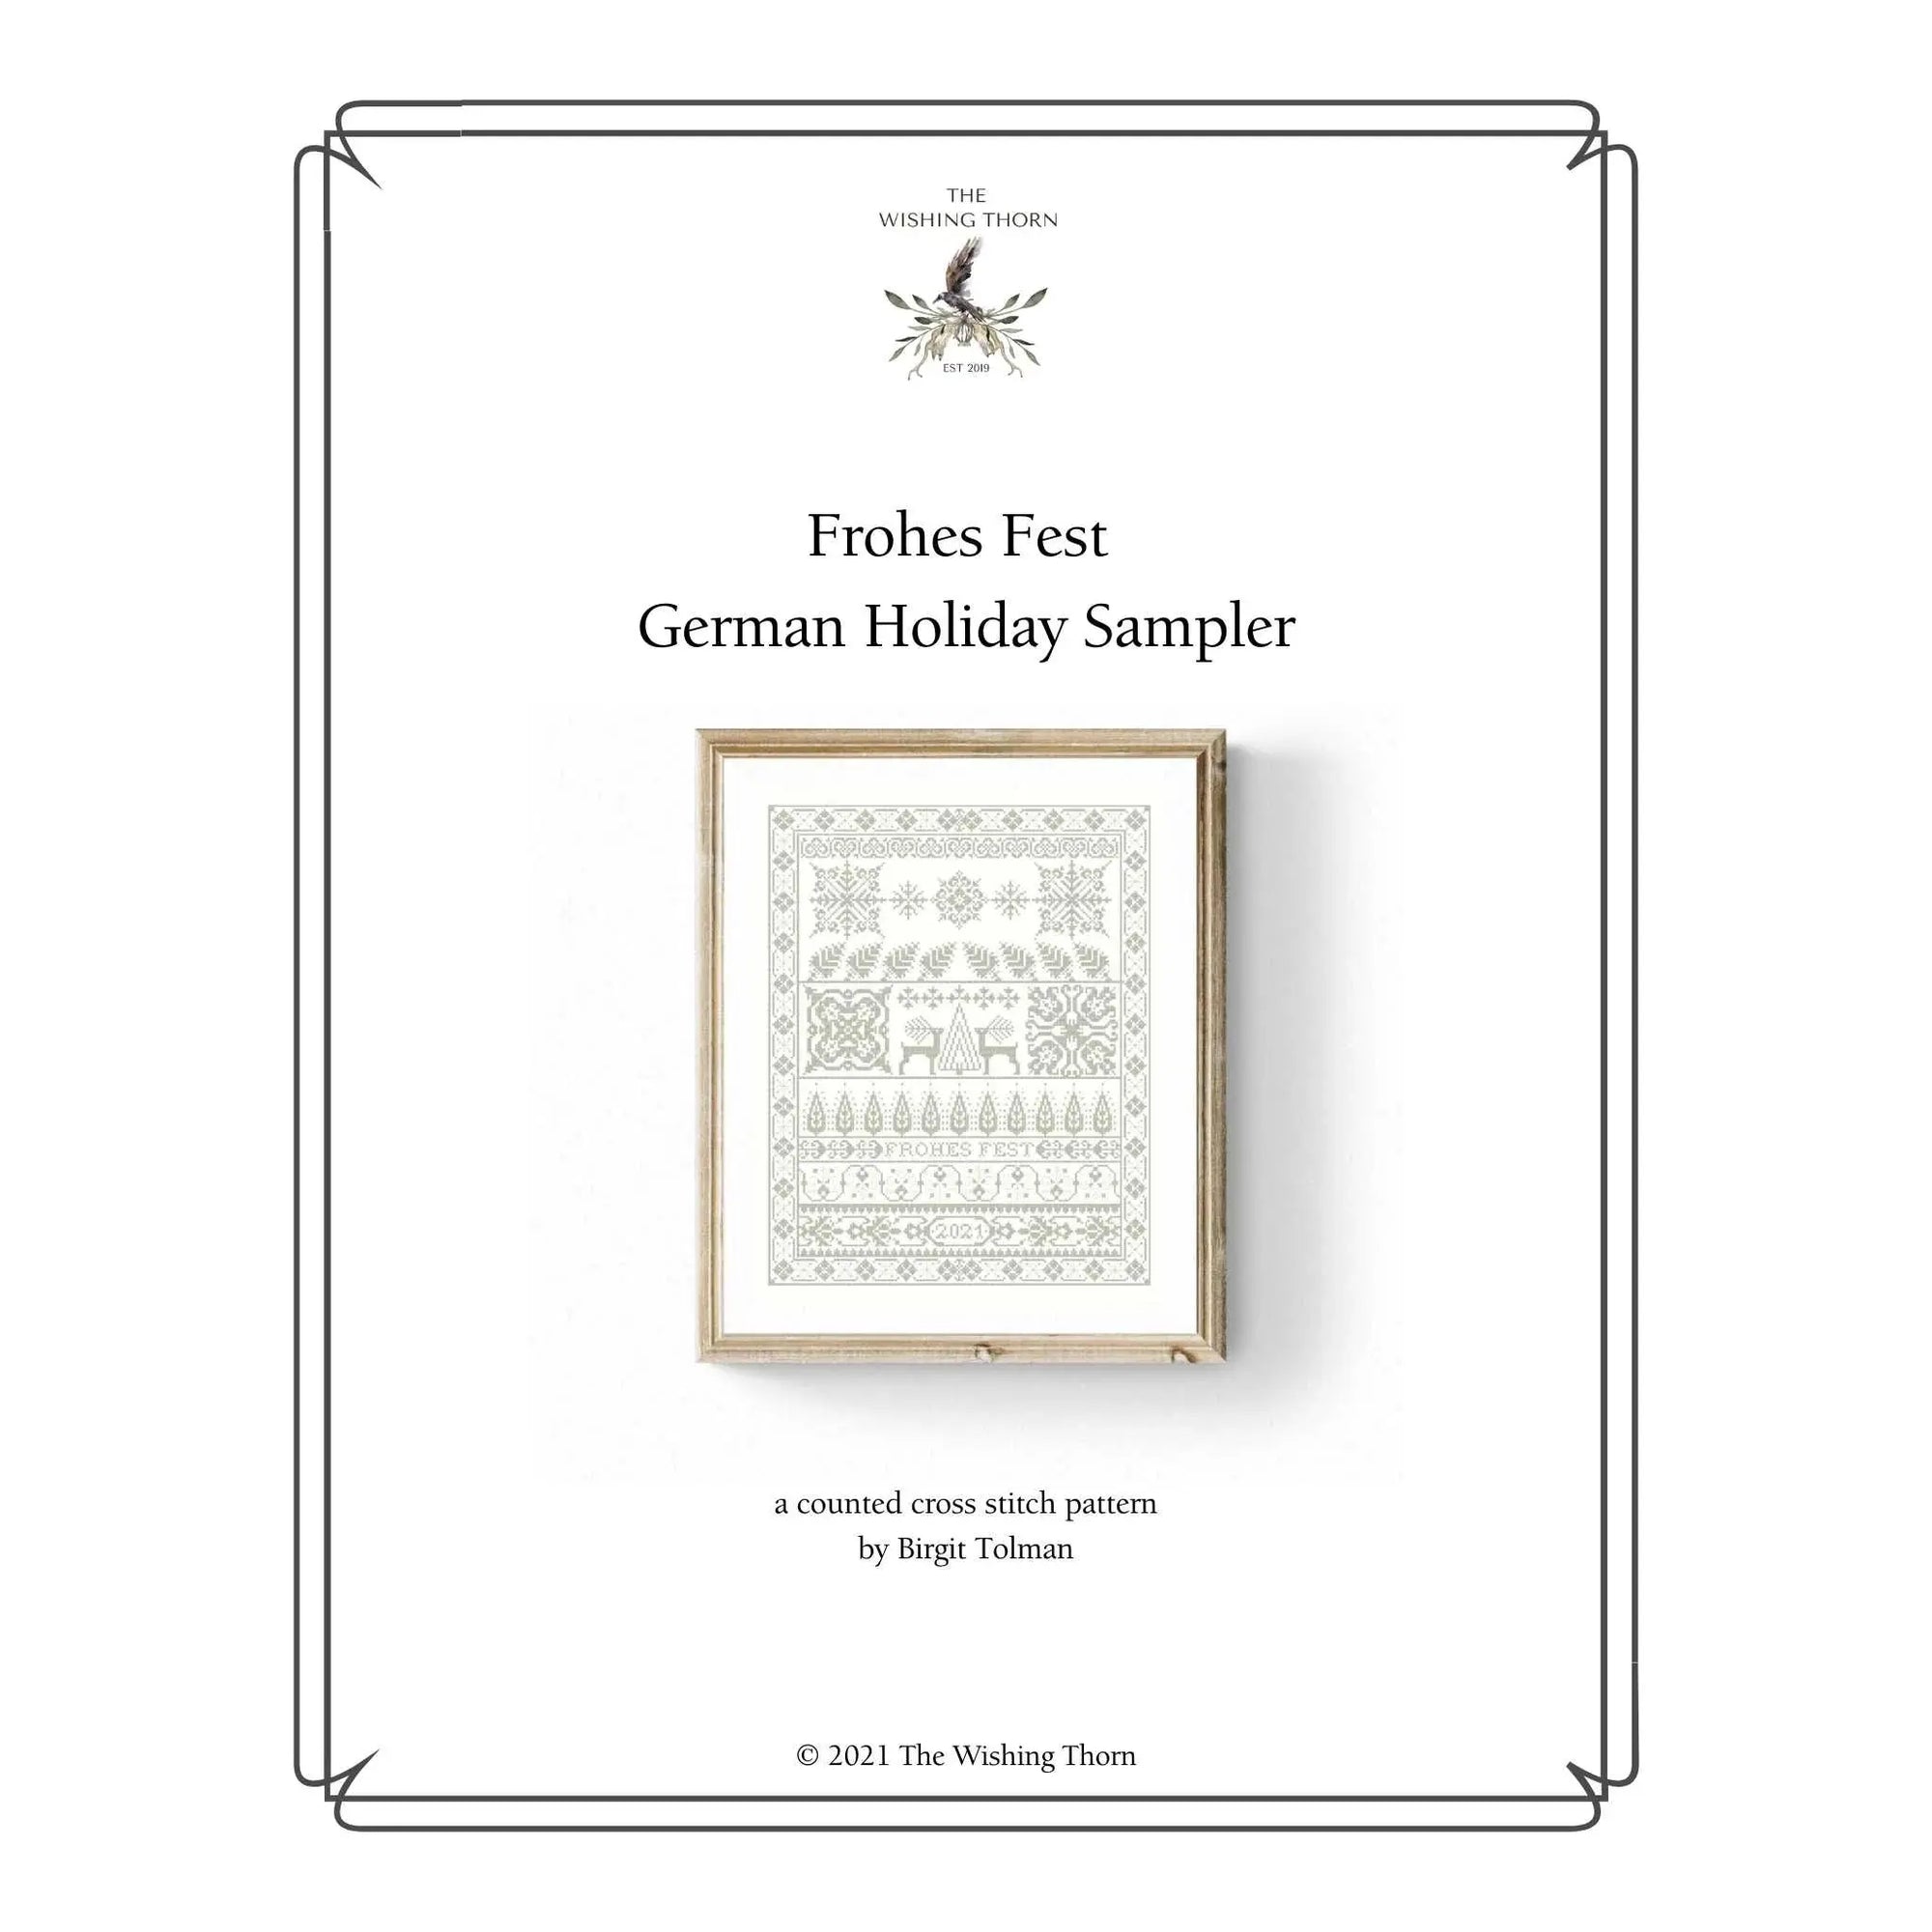 Frohes Fest German Holiday Sampler by The Wishing Thorn The Wishing Thorn